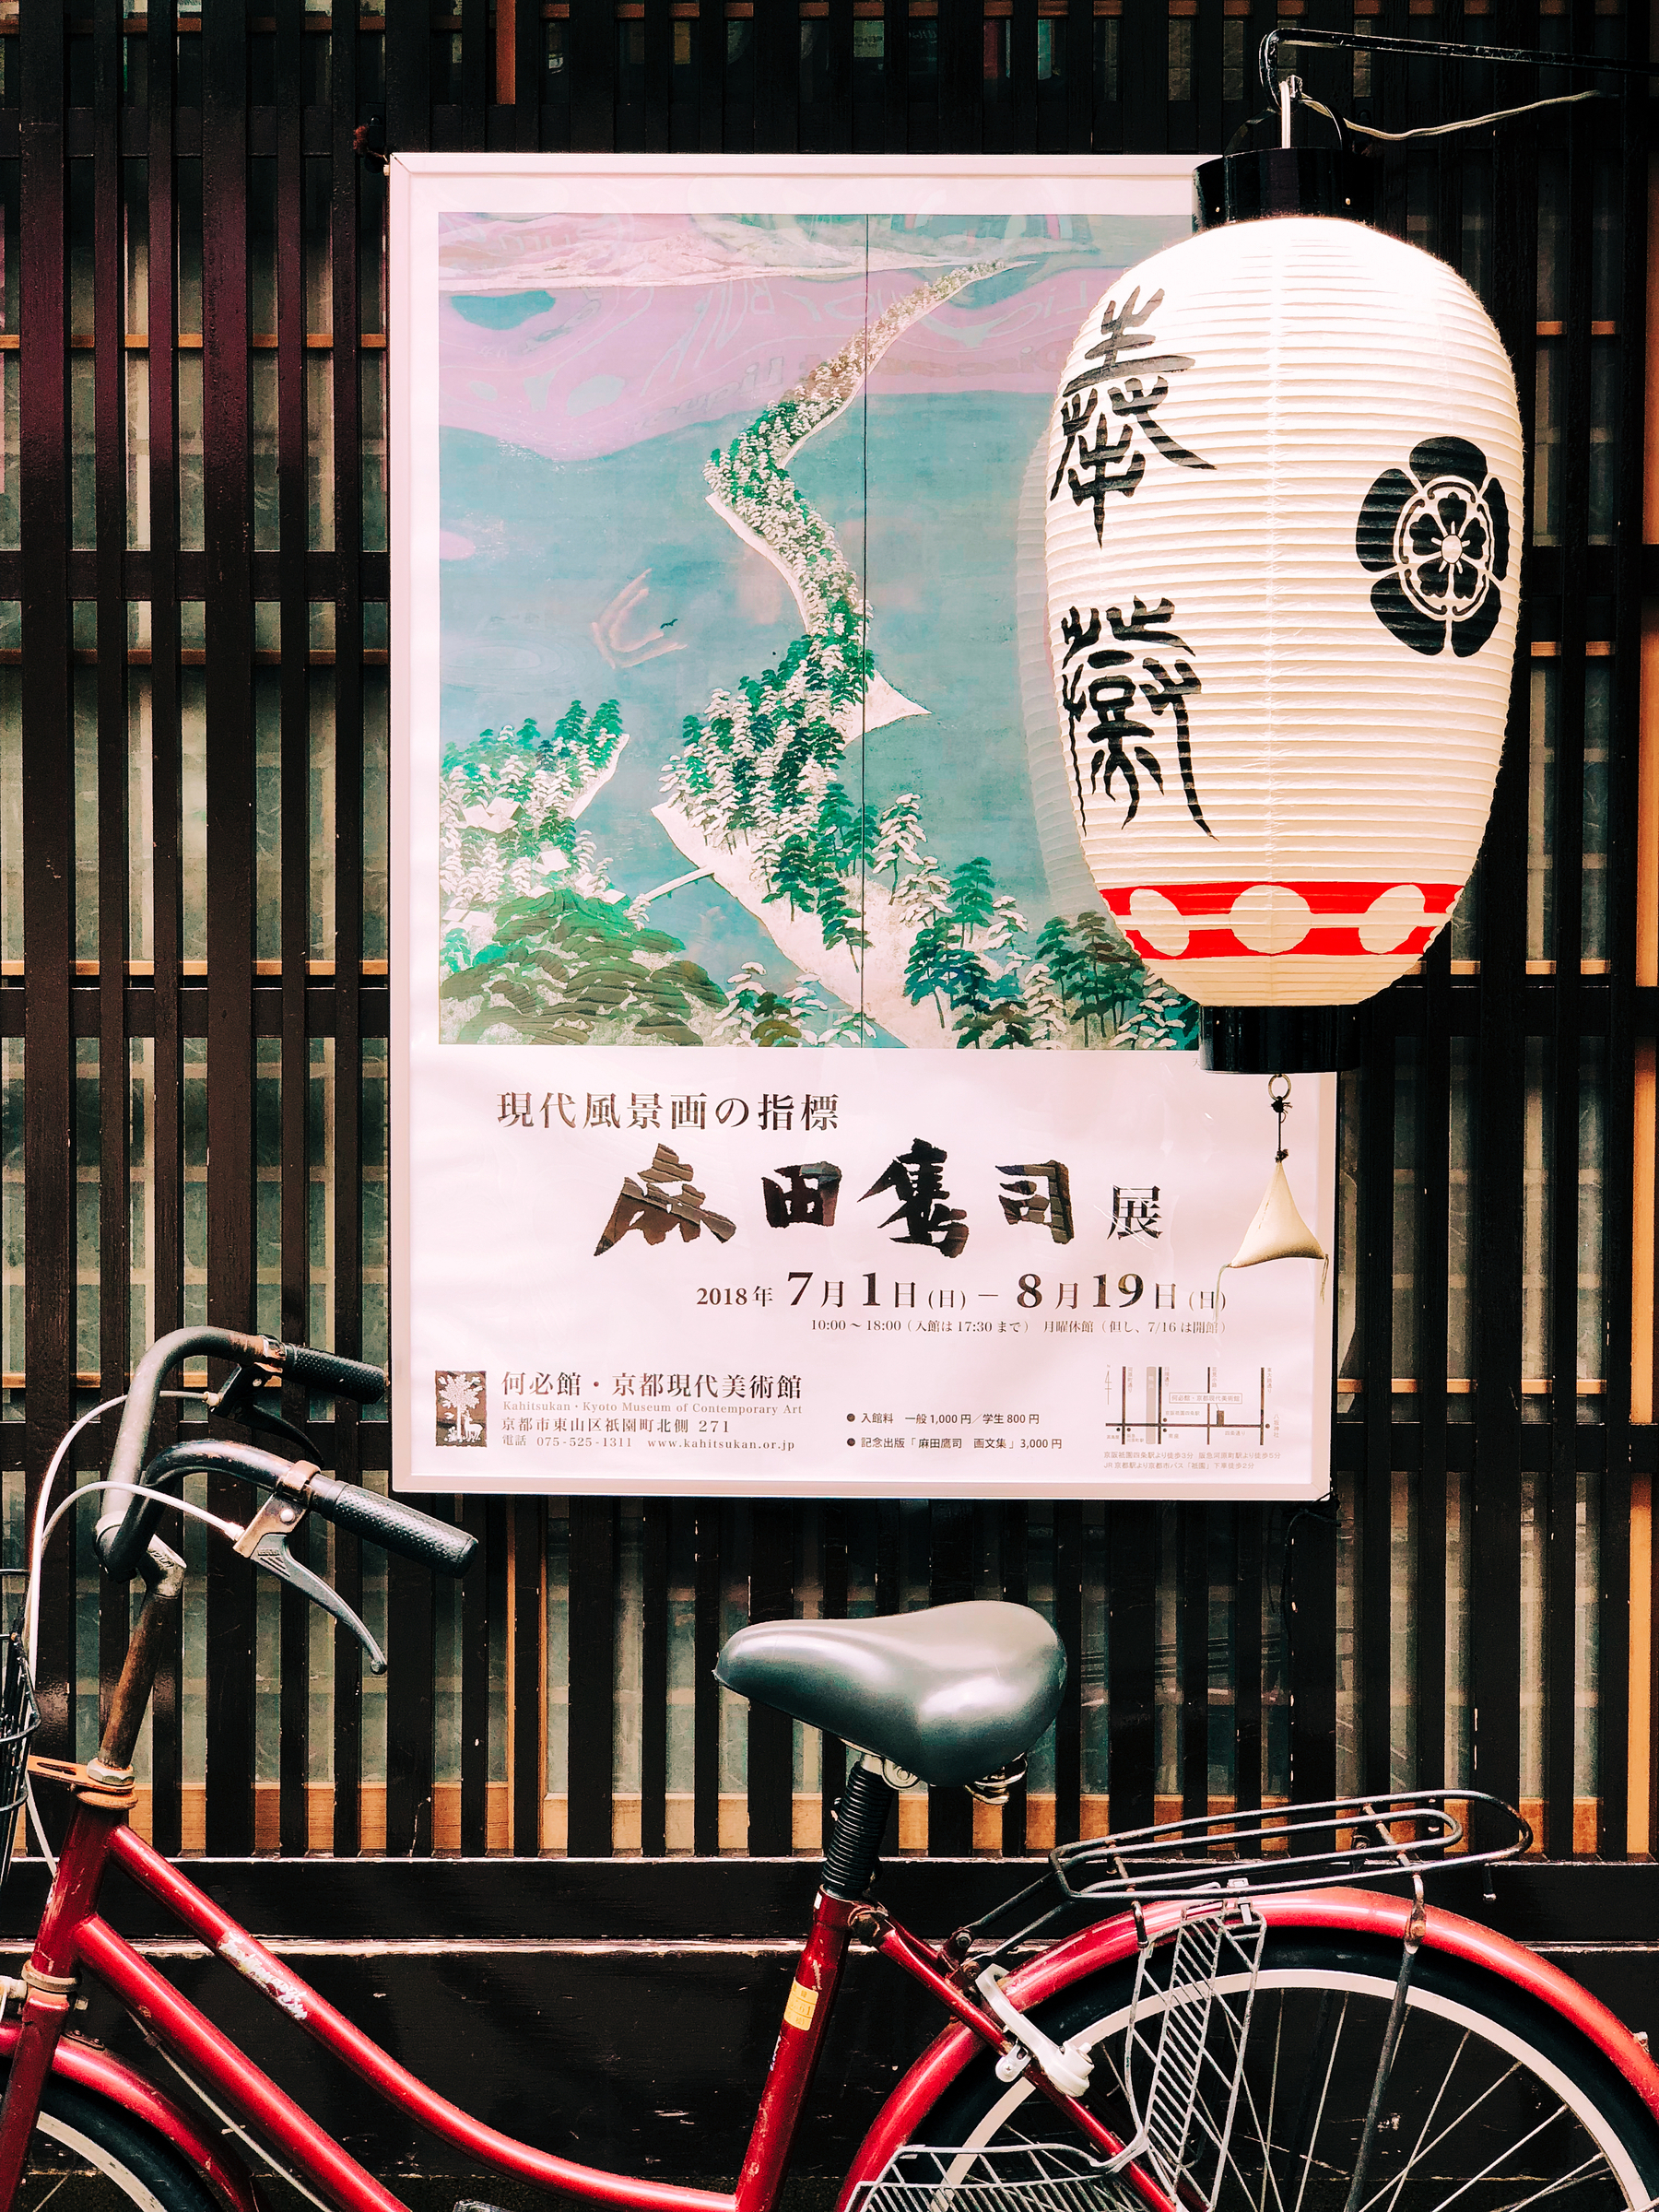 The scene is set in Japan. A bicycle is parked against a wall where a lovely poster is hanging. There’s a lamp next to it. 